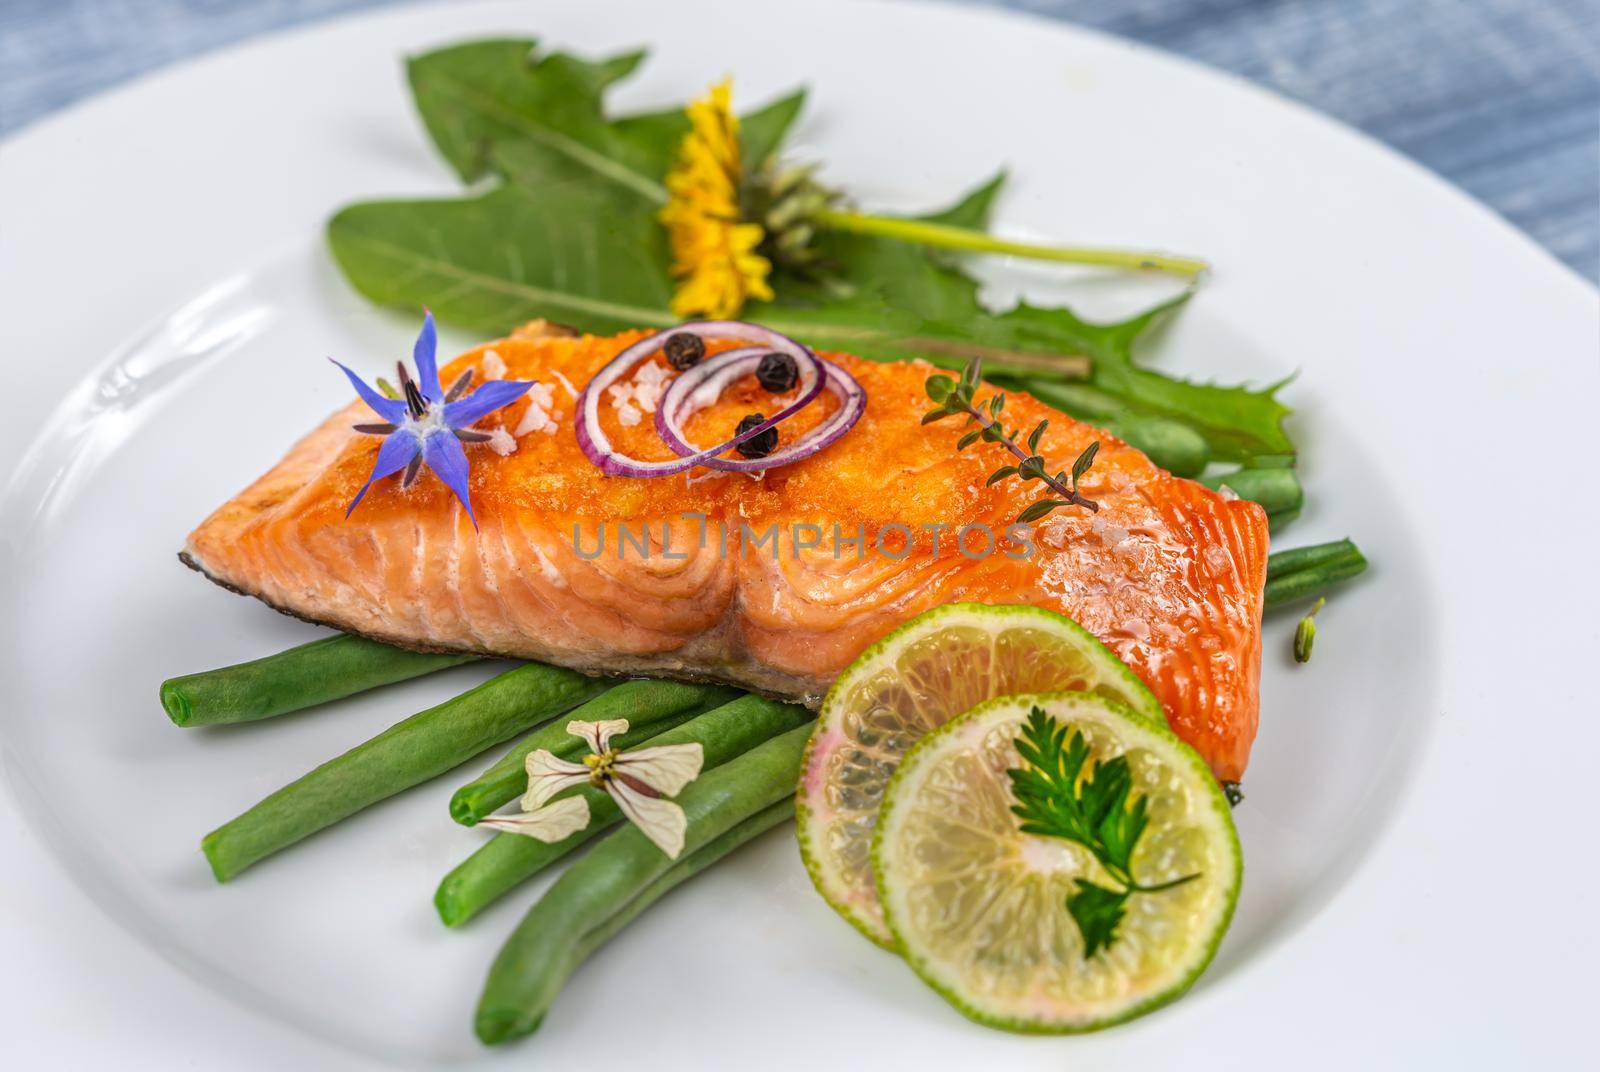 Plate of salmon, green bean on standby wooden board minimalist photo, by JPC-PROD